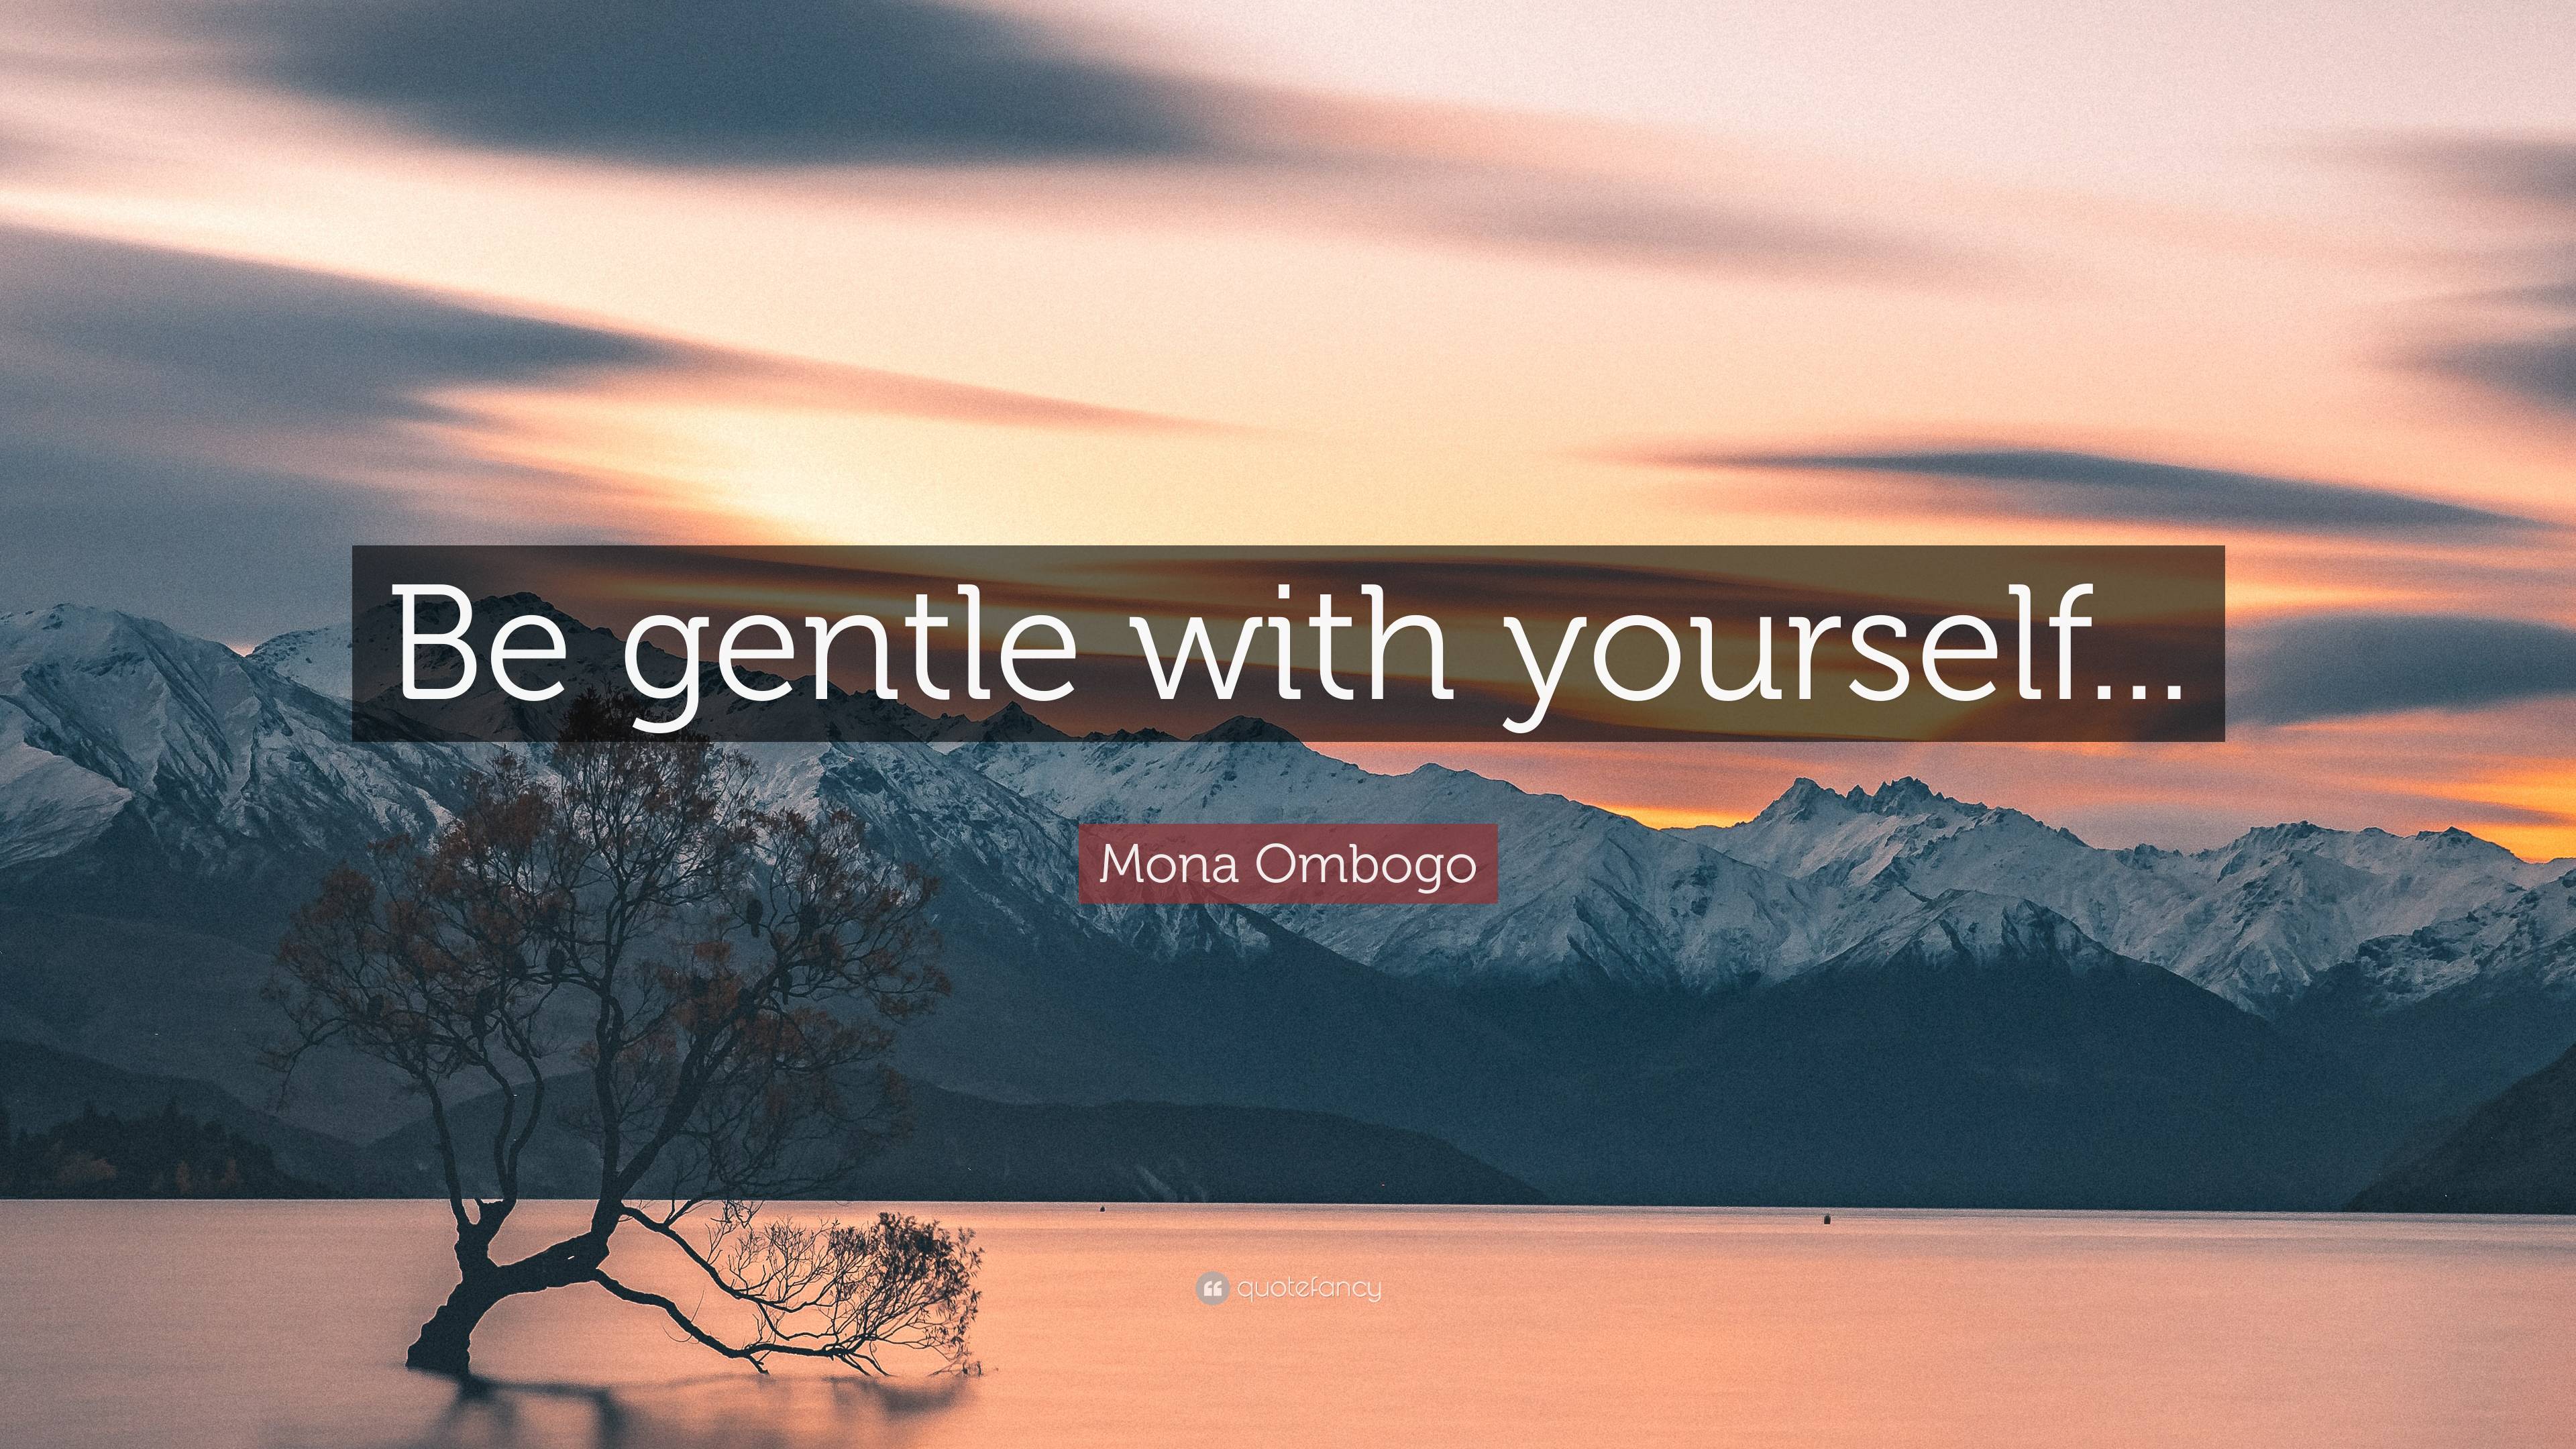 Mona Ombogo Quote: “Be gentle with yourself...”